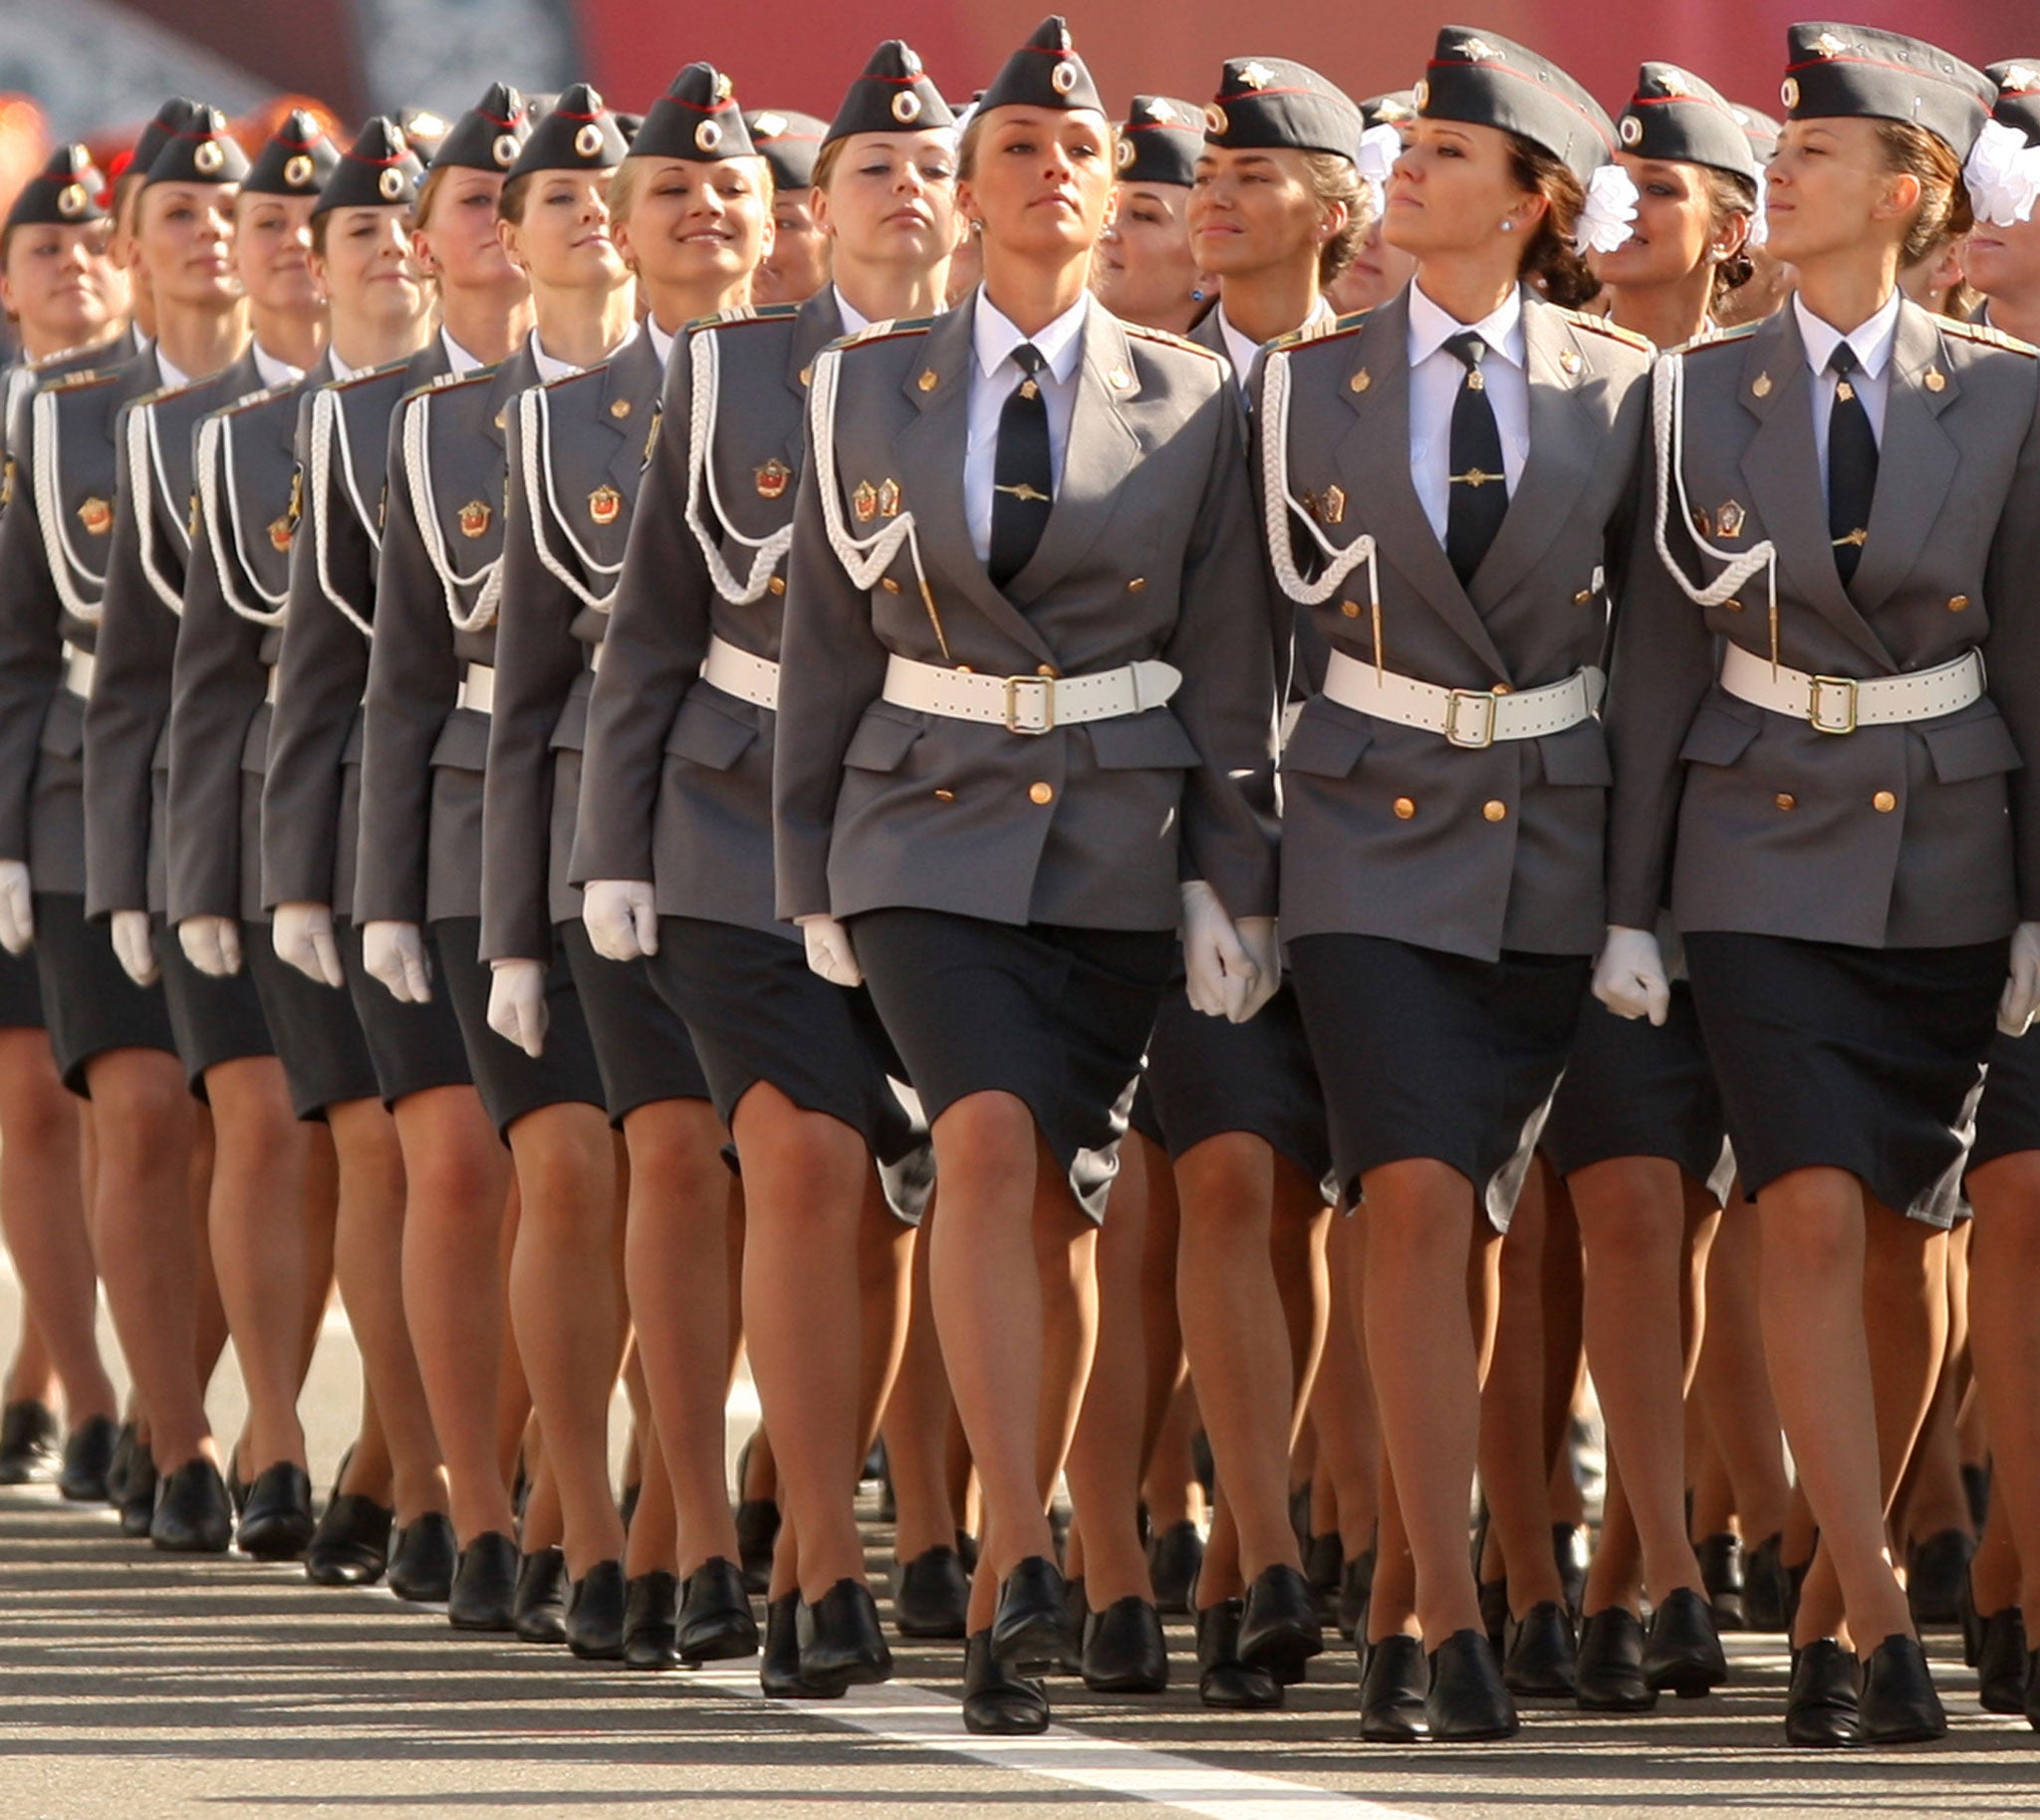 Russian Policewomen To Be Disciplined For Short Skirts In